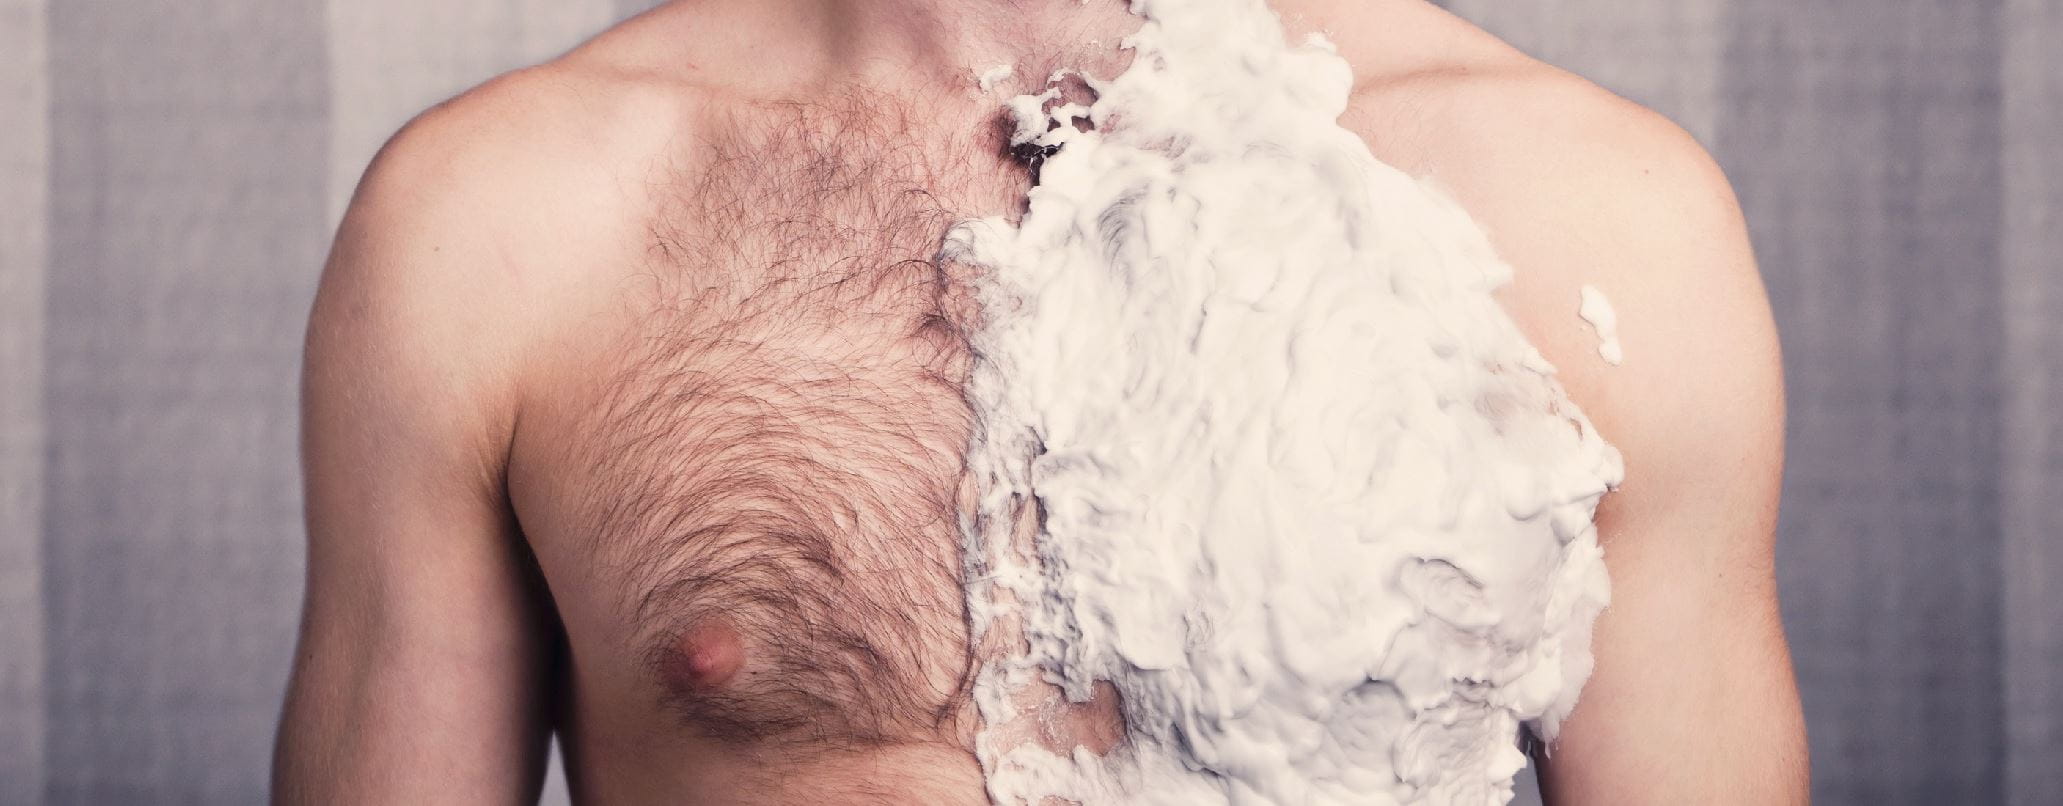 hairy chest of a man with shaving cream